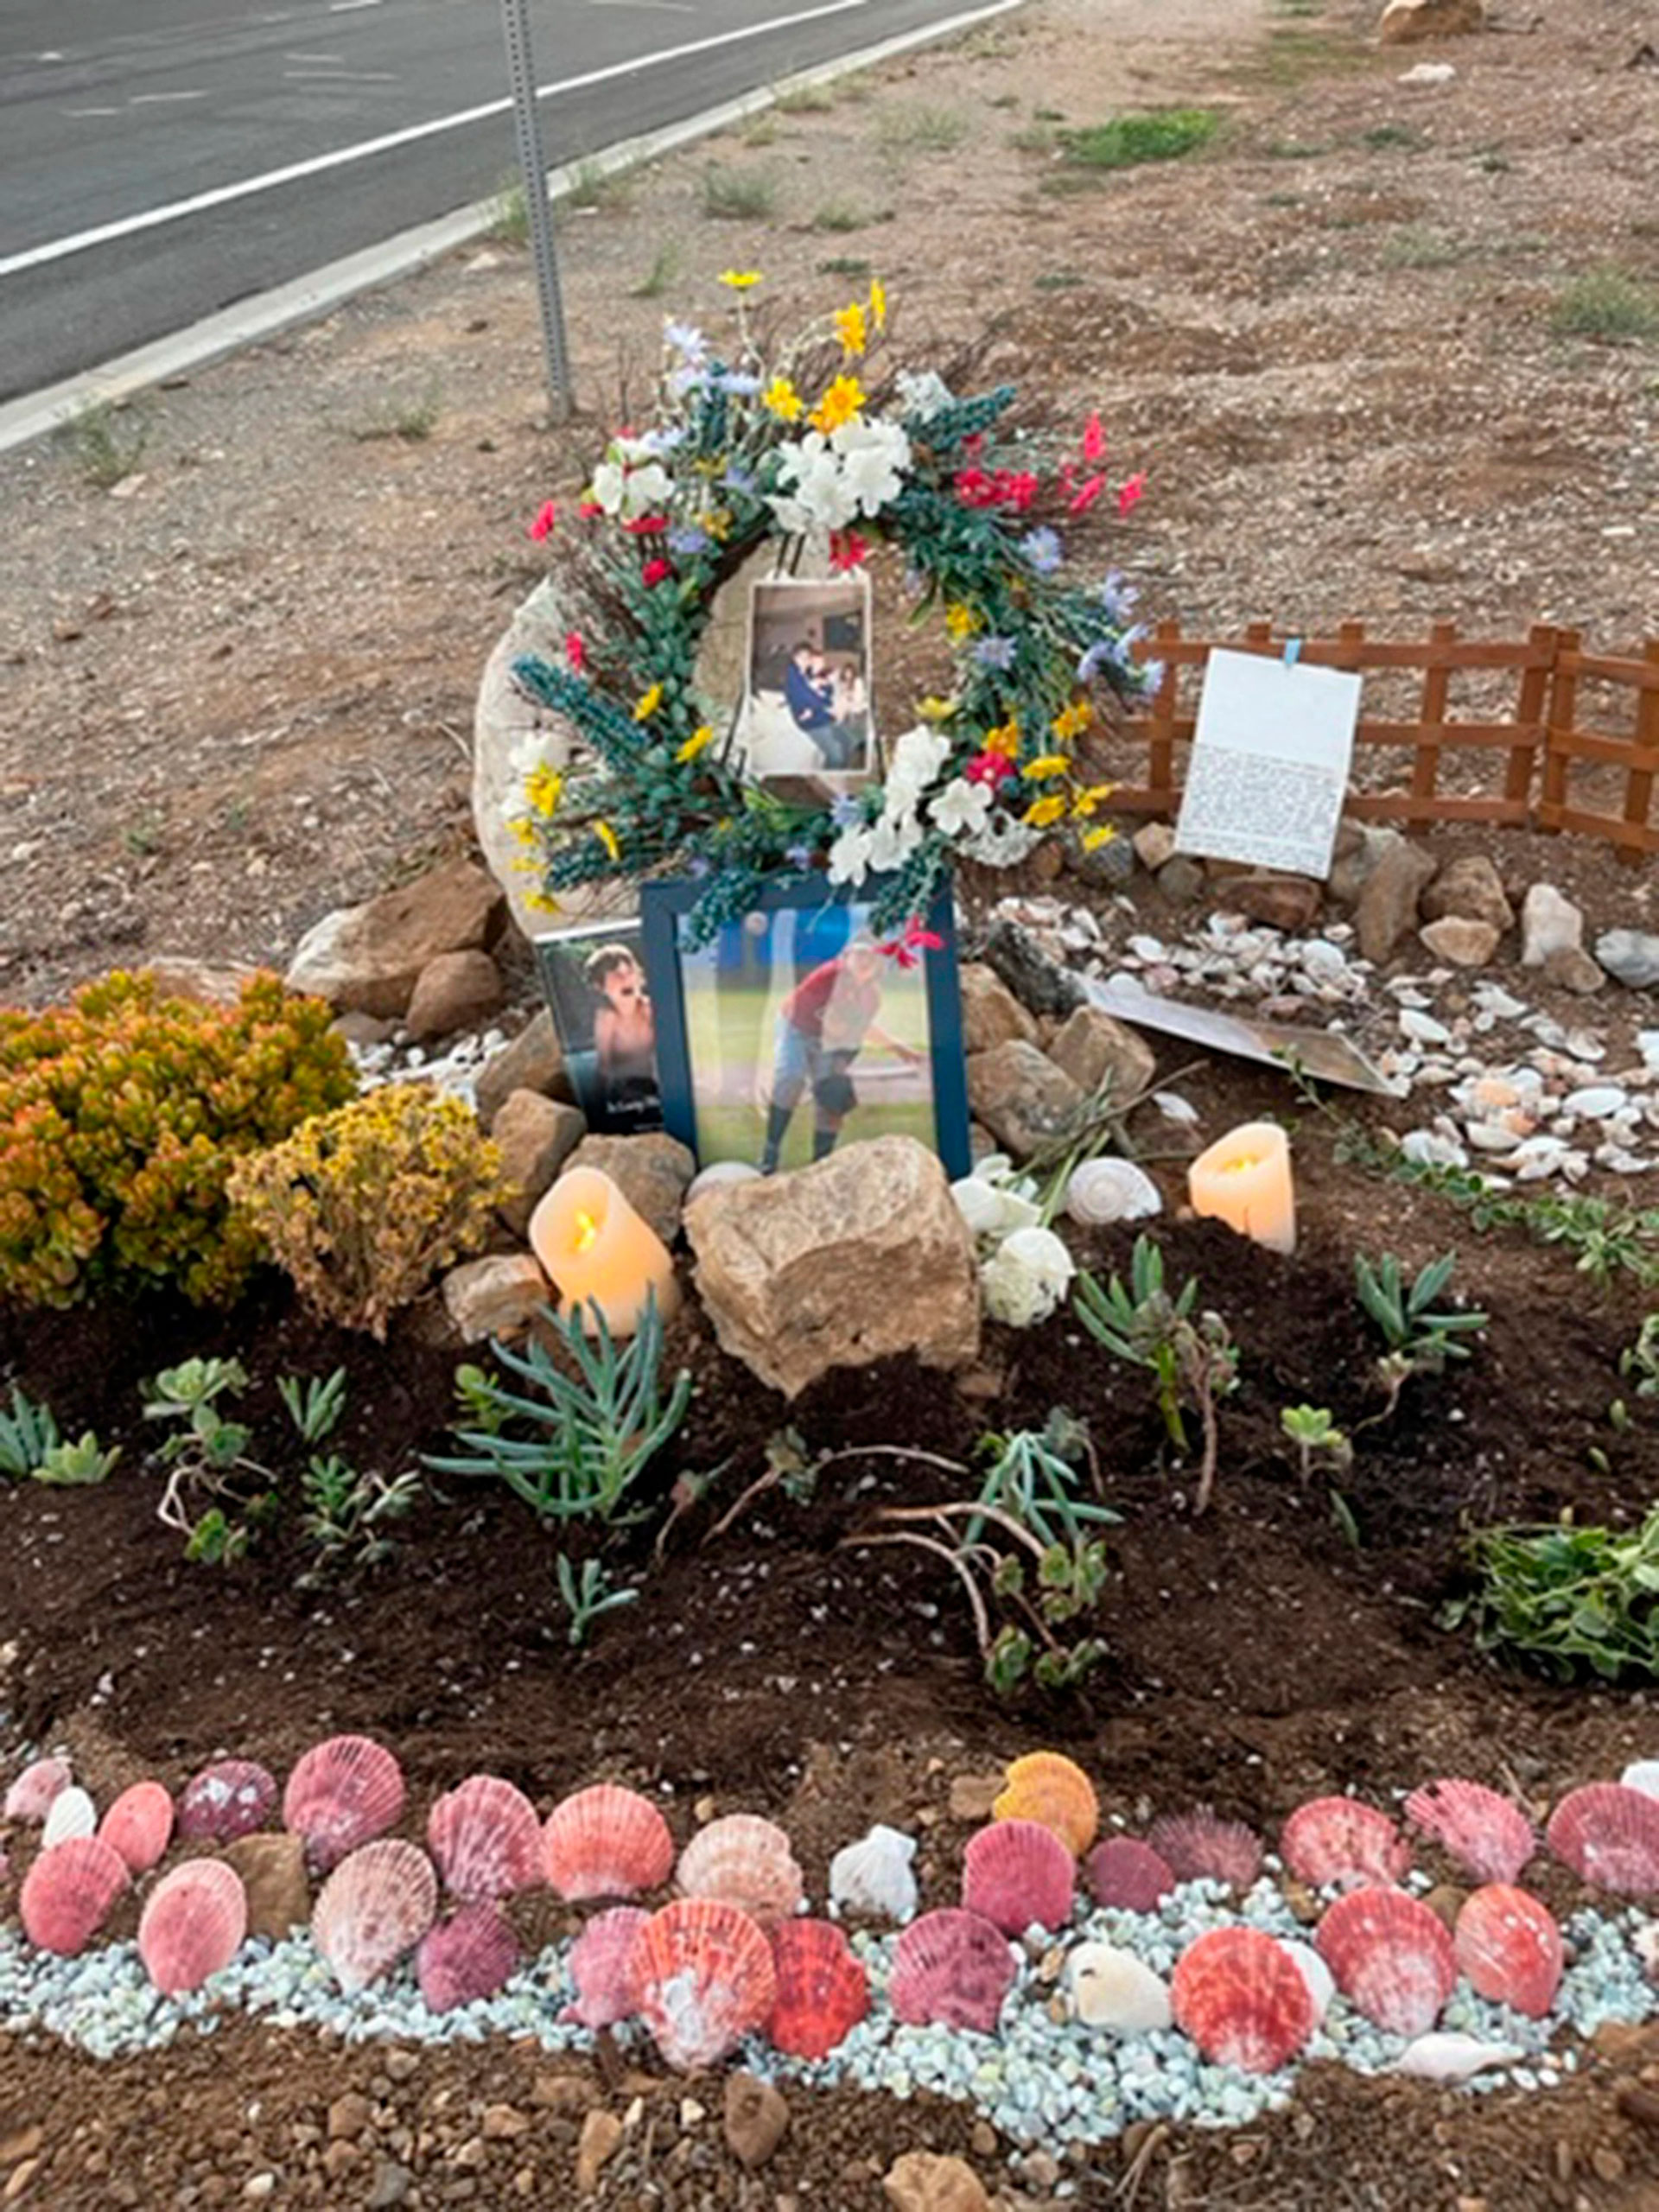 A memorial site was erected at the site of Lubia's death